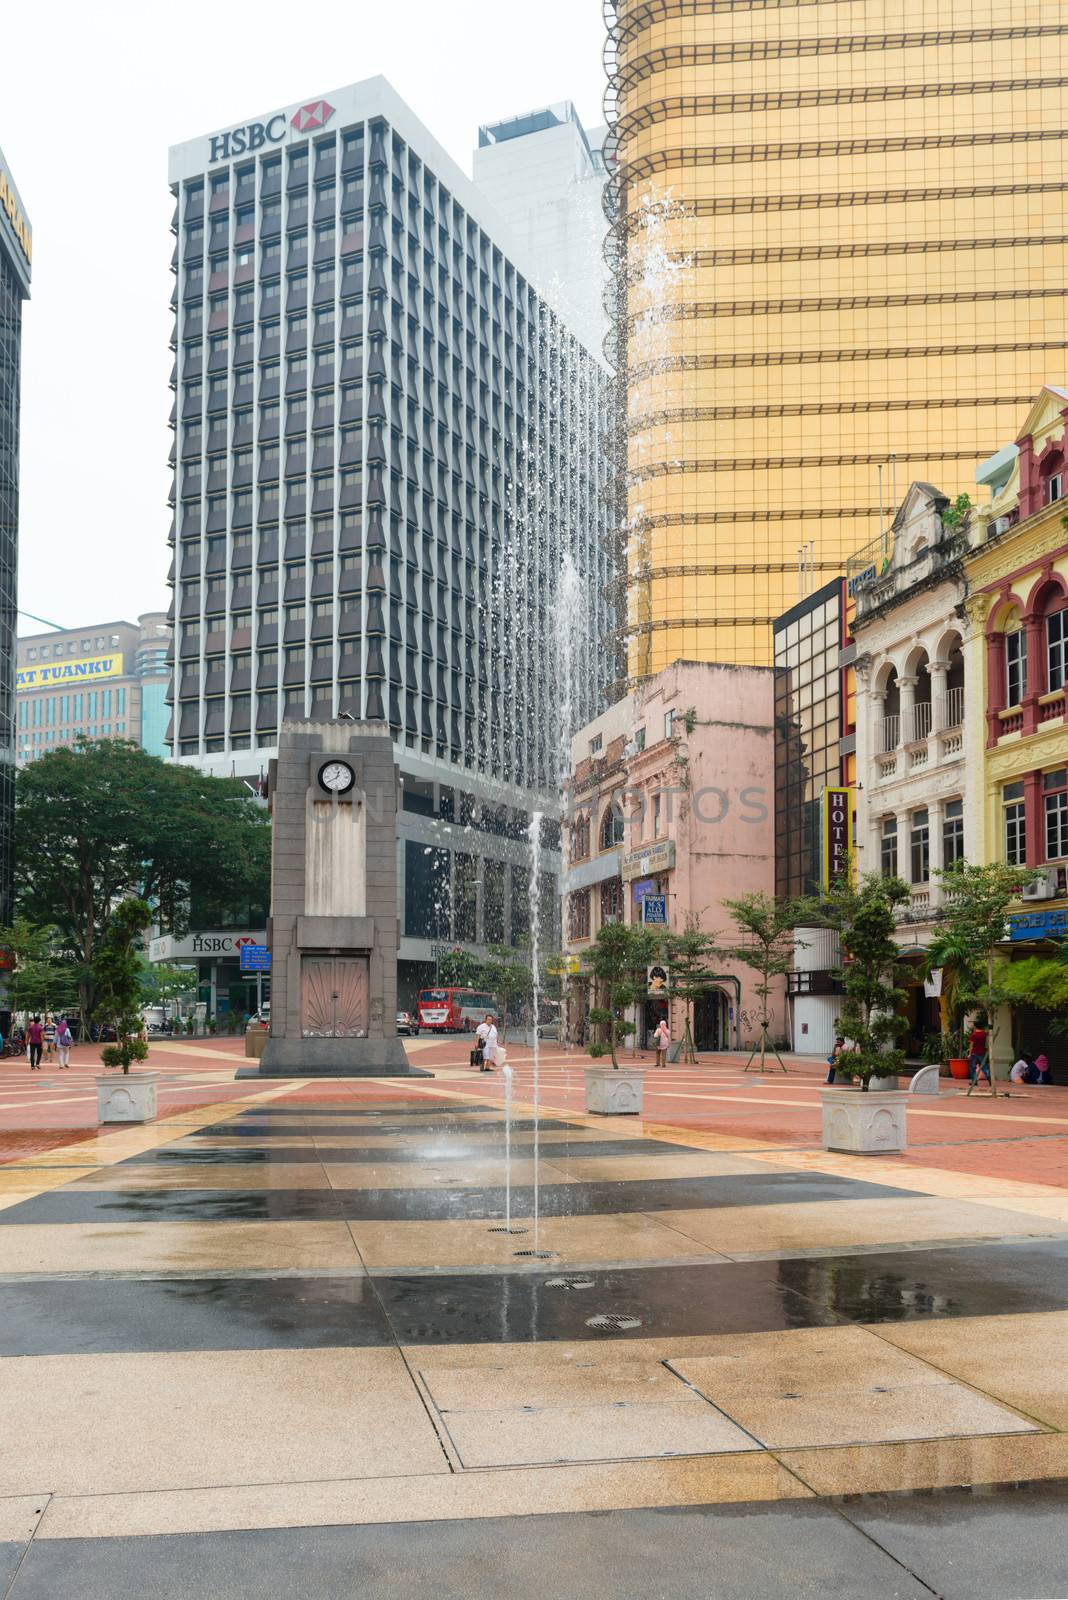 KUALA LUMPUR - JUNE 22: Fountain and clock tower on old market square on June 22, 2013 in Kuala Lumpur, Malaysia. The clock tower was erected in 1937 to commemorate the coronation of King George VI. 